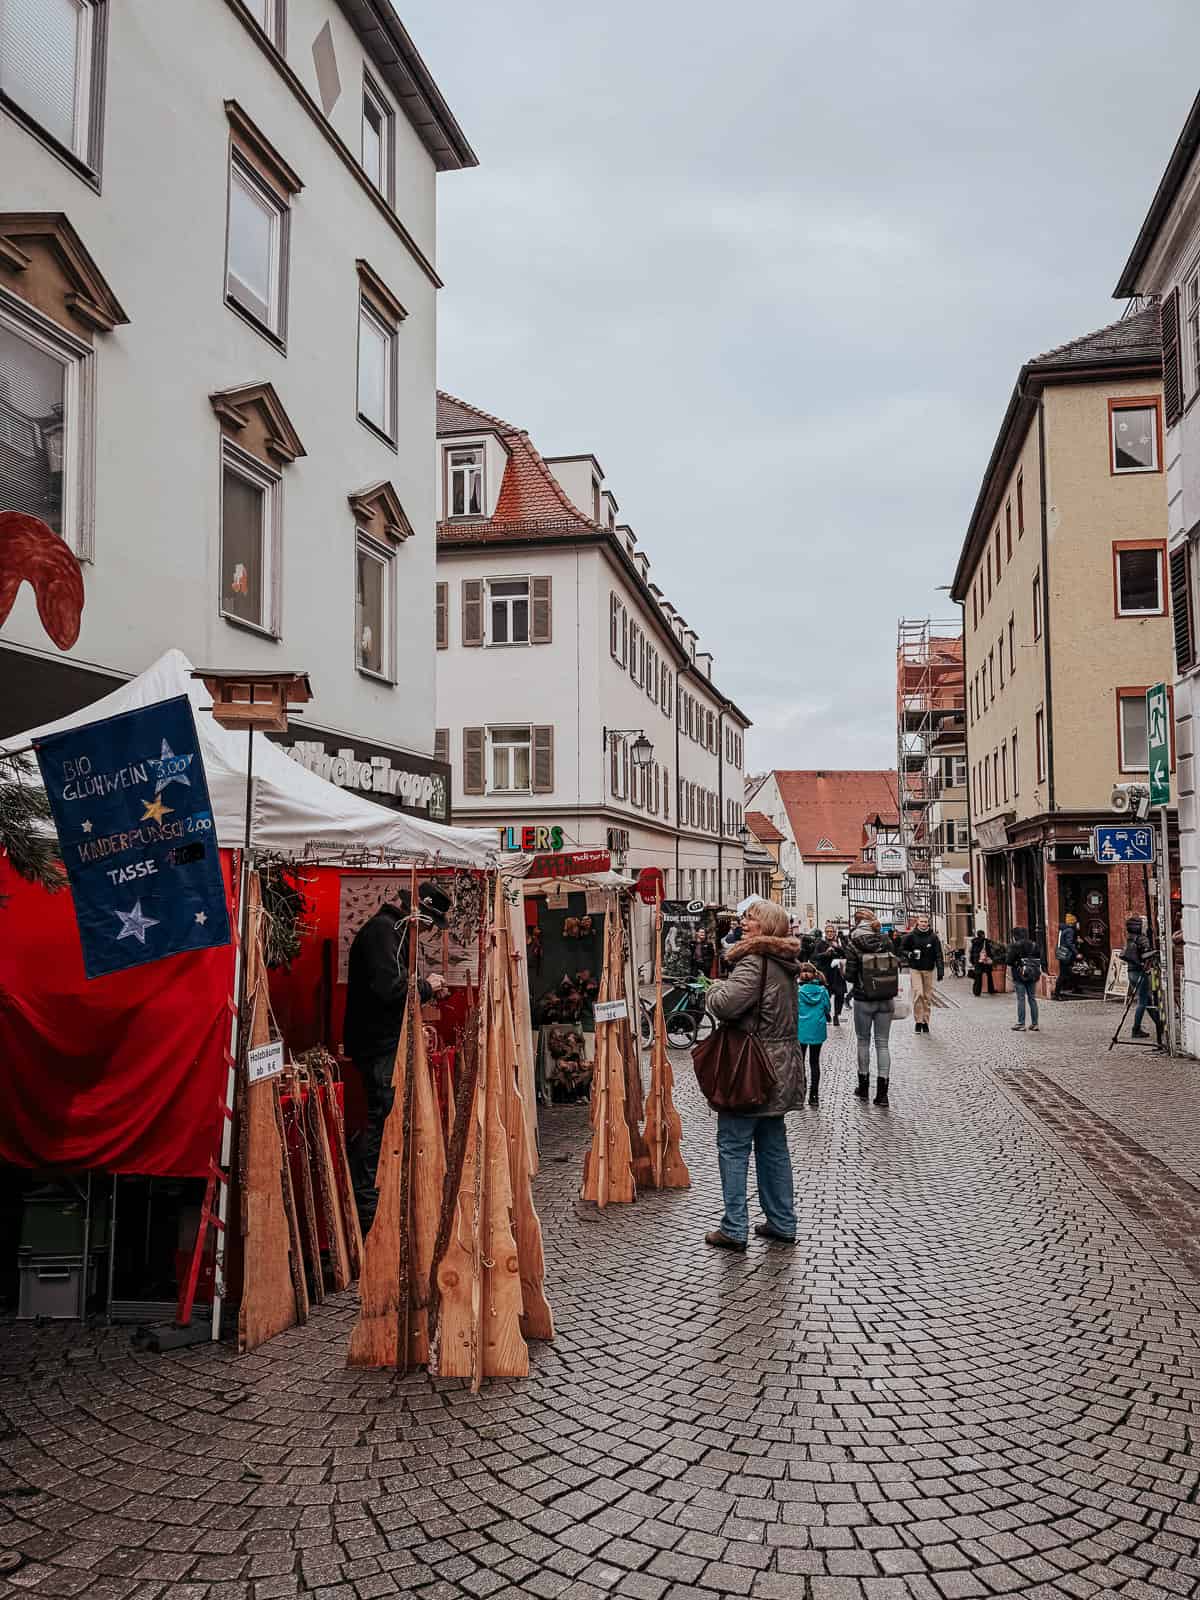 Cobblestone street in Tübingen bustling with people browsing items at various market stalls selling wooden artifacts and other handicrafts.